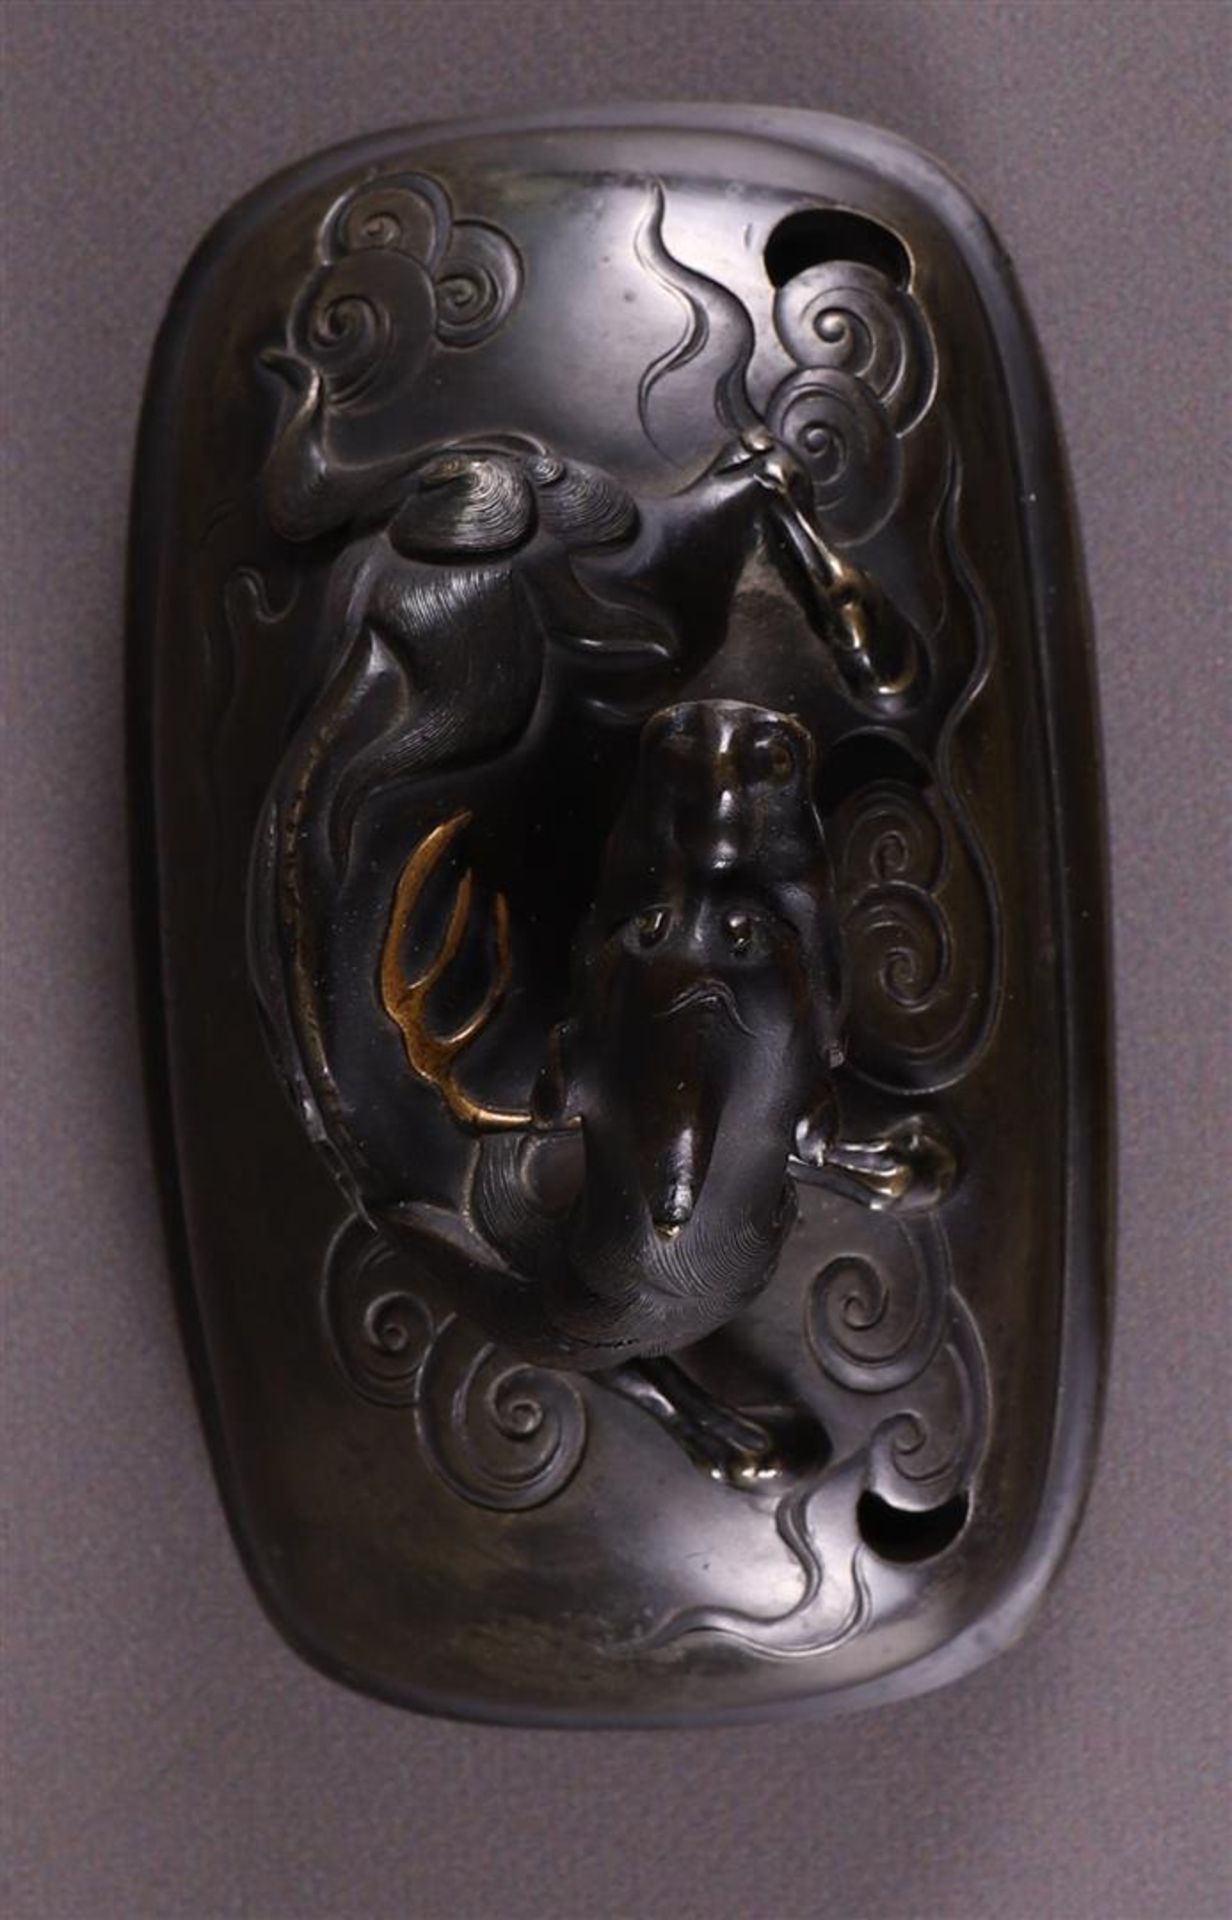 A brown patinated koro with dragon heads for ears, China, 2nd half 19th century. - Bild 8 aus 9